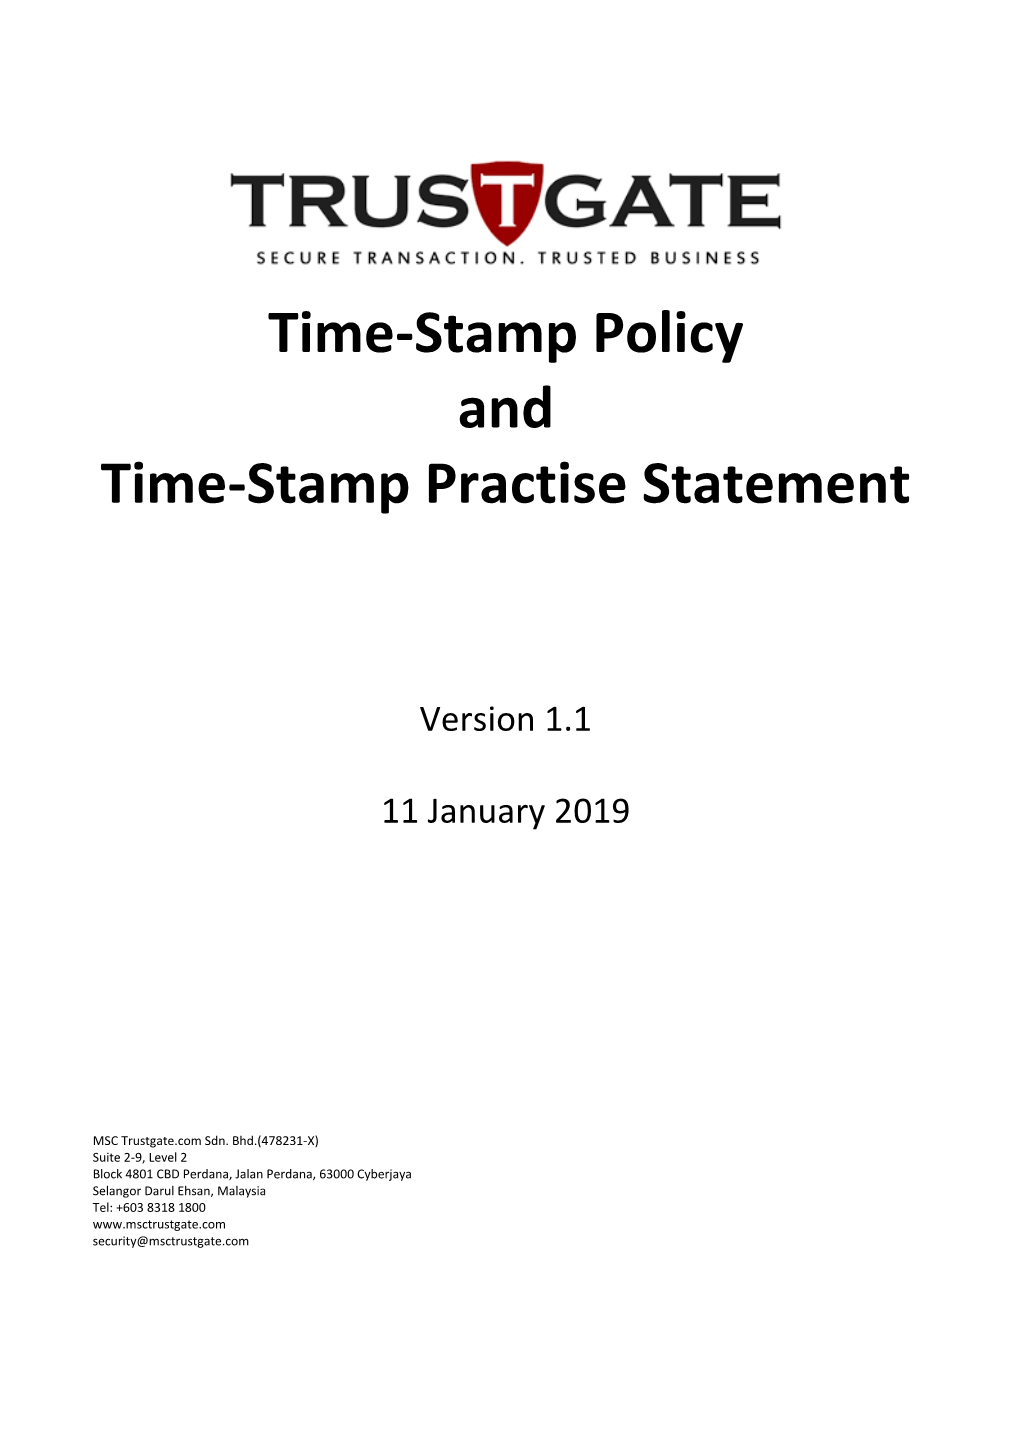 Time-Stamp Policy and Time-Stamp Practice Statement